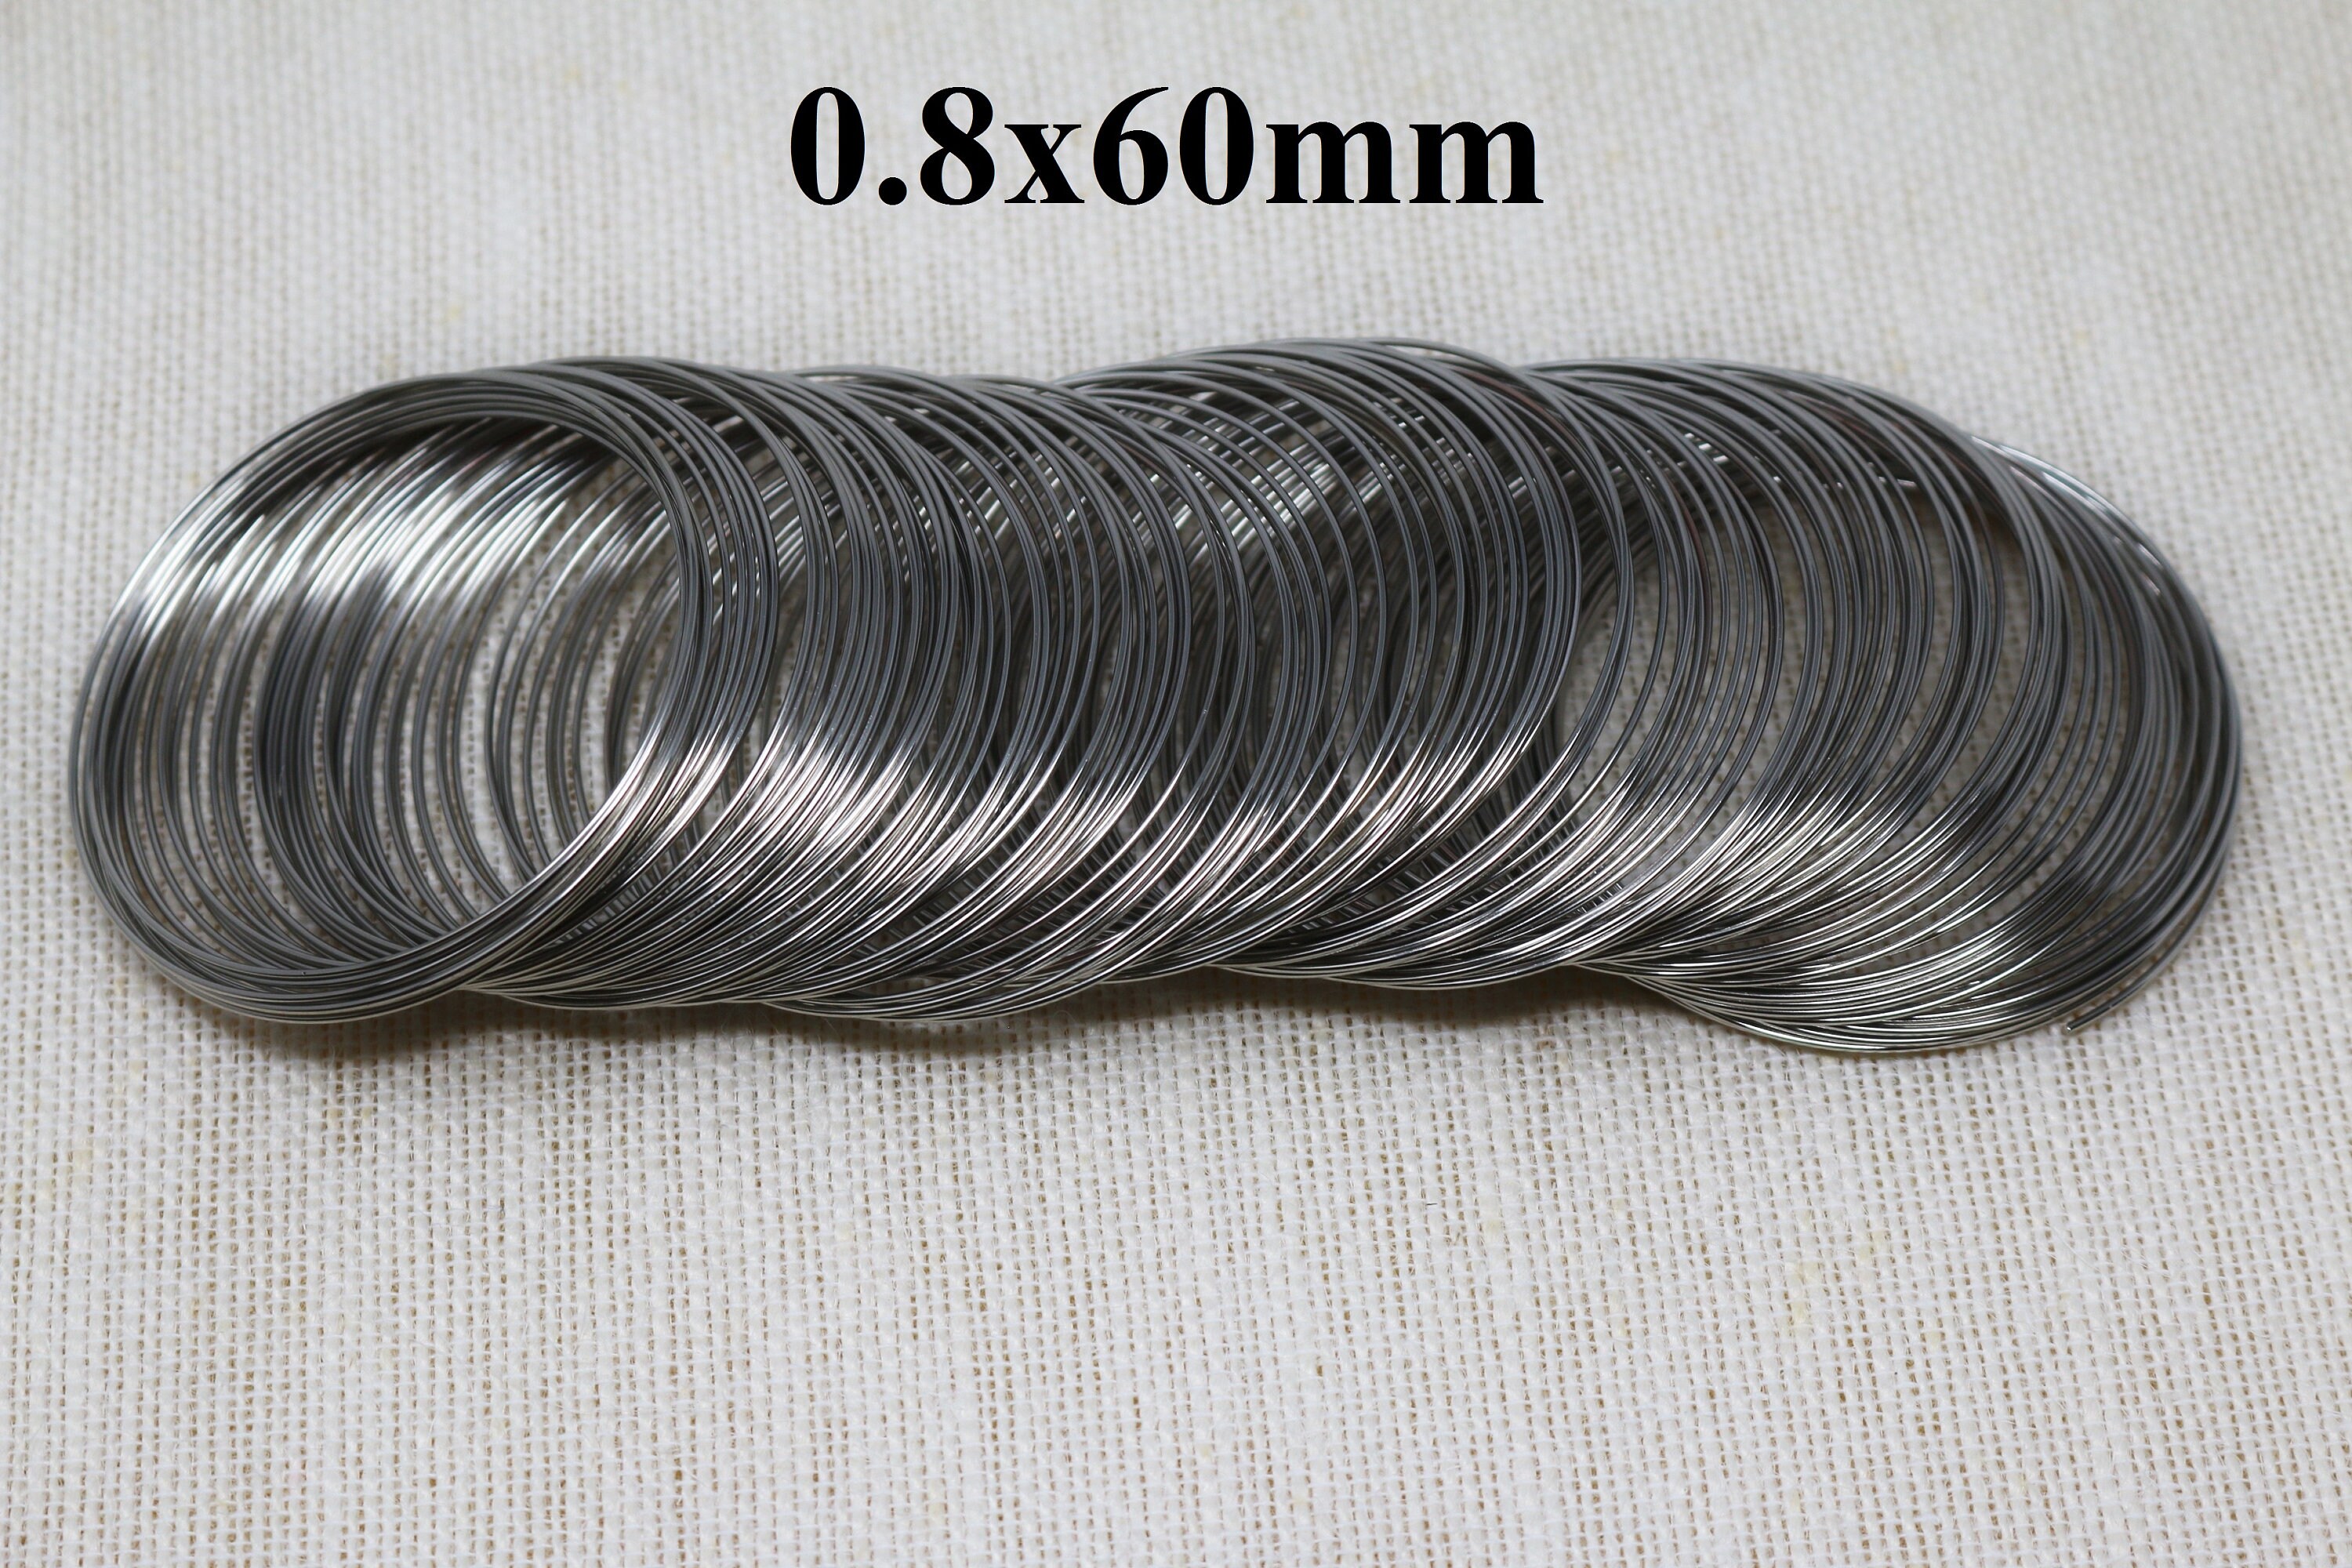 BEADING STRING / BEADING Wire - Very Strong and Flexible